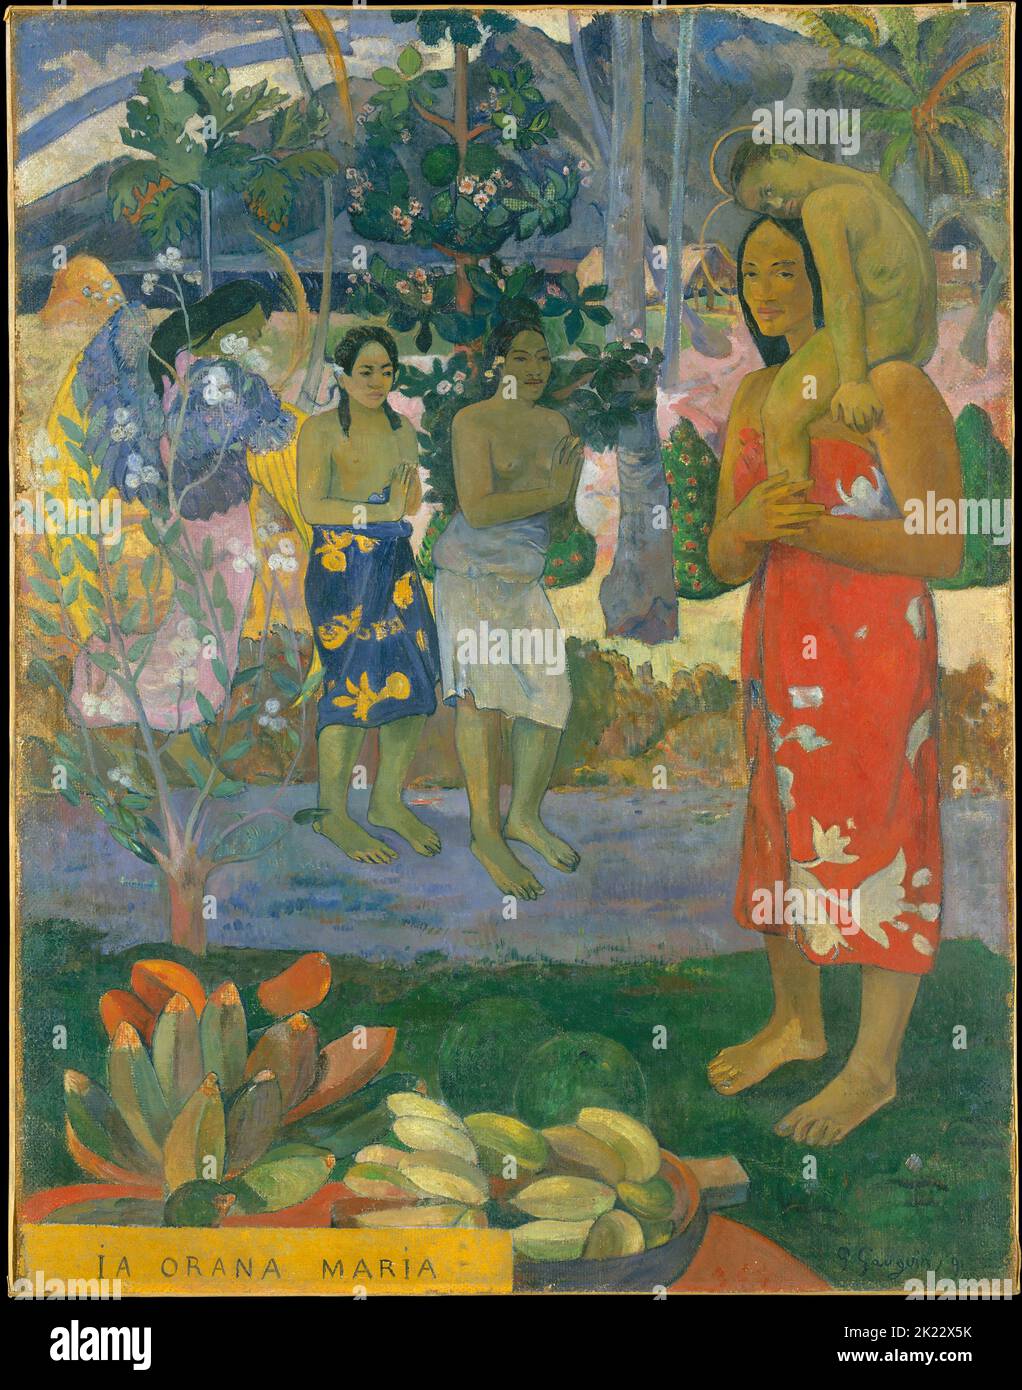 Tahiti: 'Ia Orana Maria' (Hail Mary). Oil on canvas painting by Paul Gauguin (7 June 1848 - 8 May 1903), 1891. Paul Gauguin was born in Paris in 1848 and spent some of his childhood in Peru. He worked as a stockbroker with little success, and suffered from bouts of severe depression. He also painted. In 1891, Gauguin, frustrated by lack of recognition at home and financially destitute, sailed to the tropics to escape European civilisation and 'everything that is artificial and conventional'. His time there, particularly in Tahiti and the Marquesas Islands, was the subject of much interest. Stock Photo